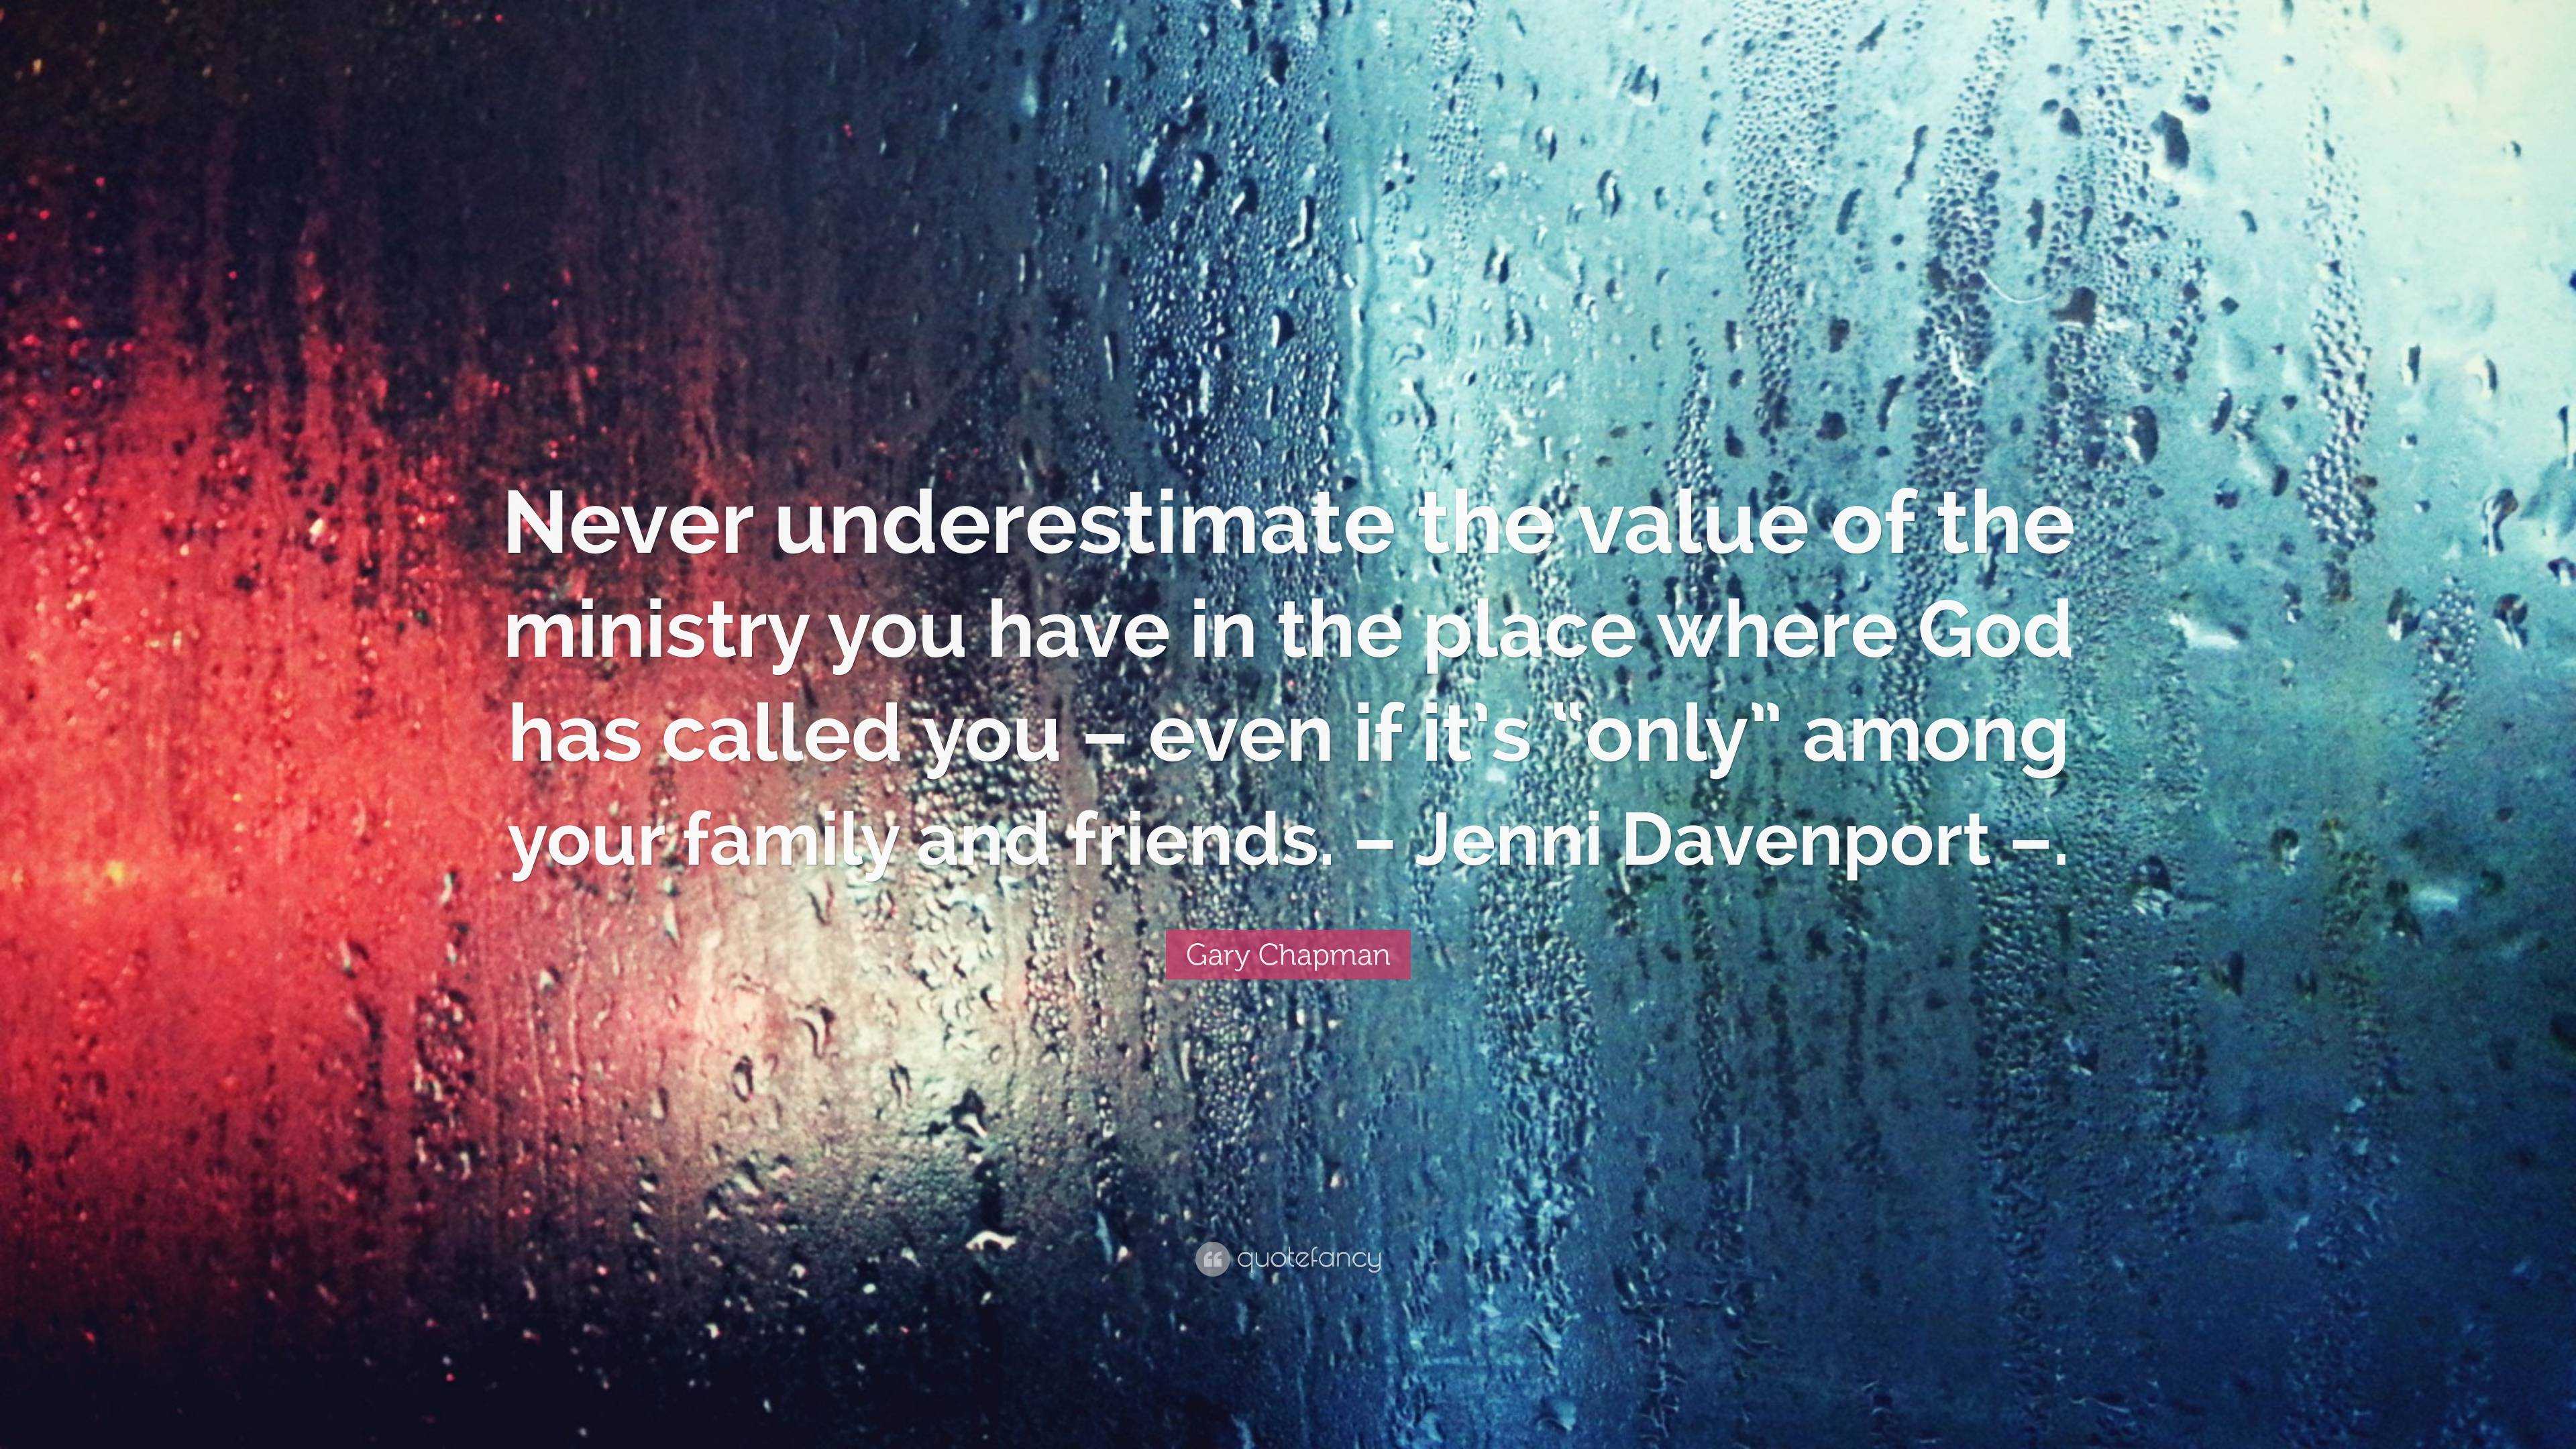 Gary Chapman Quote: “Never underestimate the value of the ministry you ...